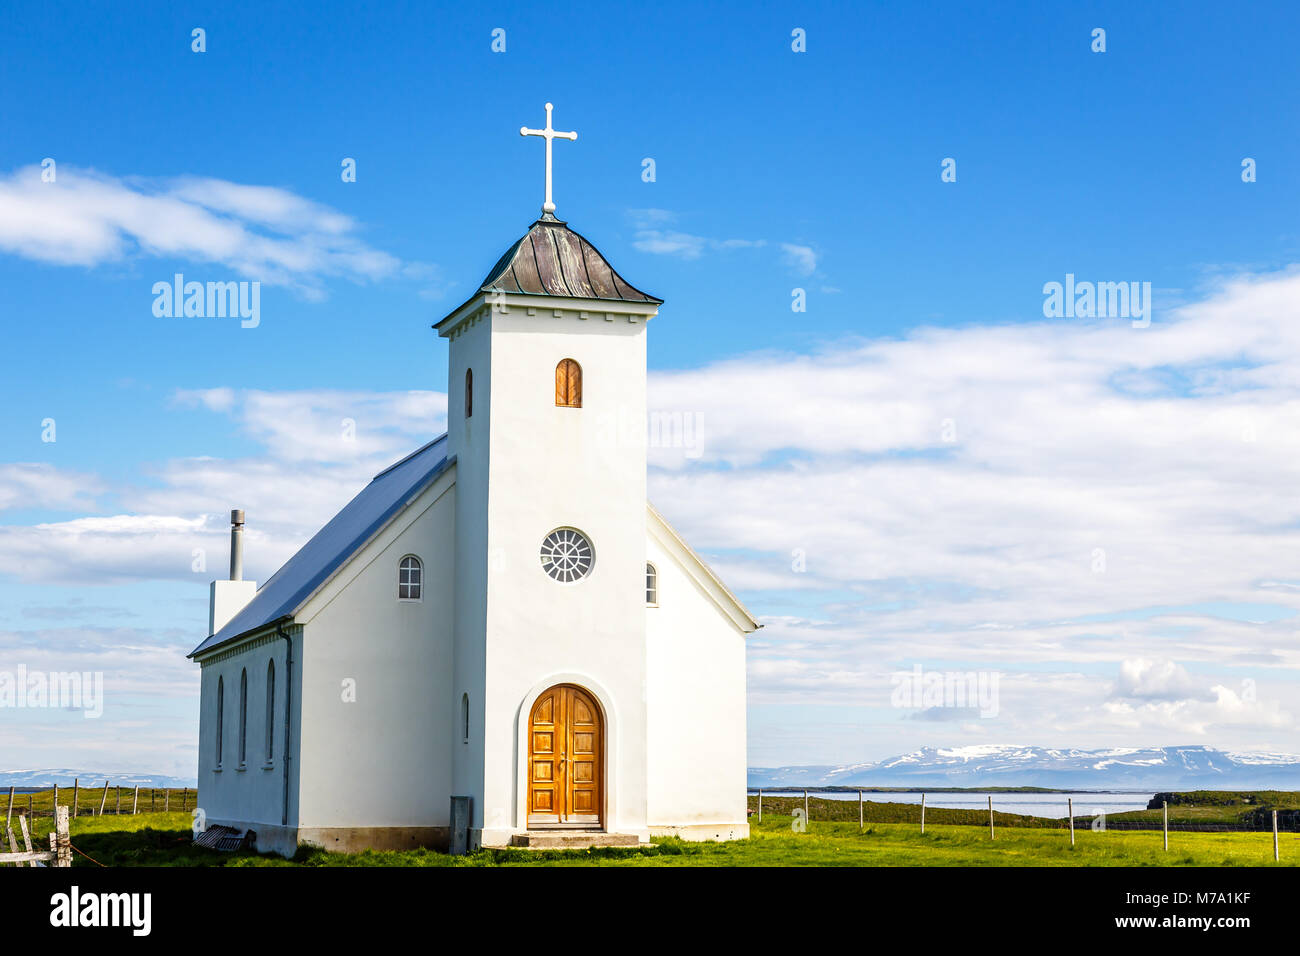 Flateyjarkirkja white lutheran church with meadow in foreground and sea  fjord with blue sky and mountains in the background, Flatey, Iceland Stock Photo